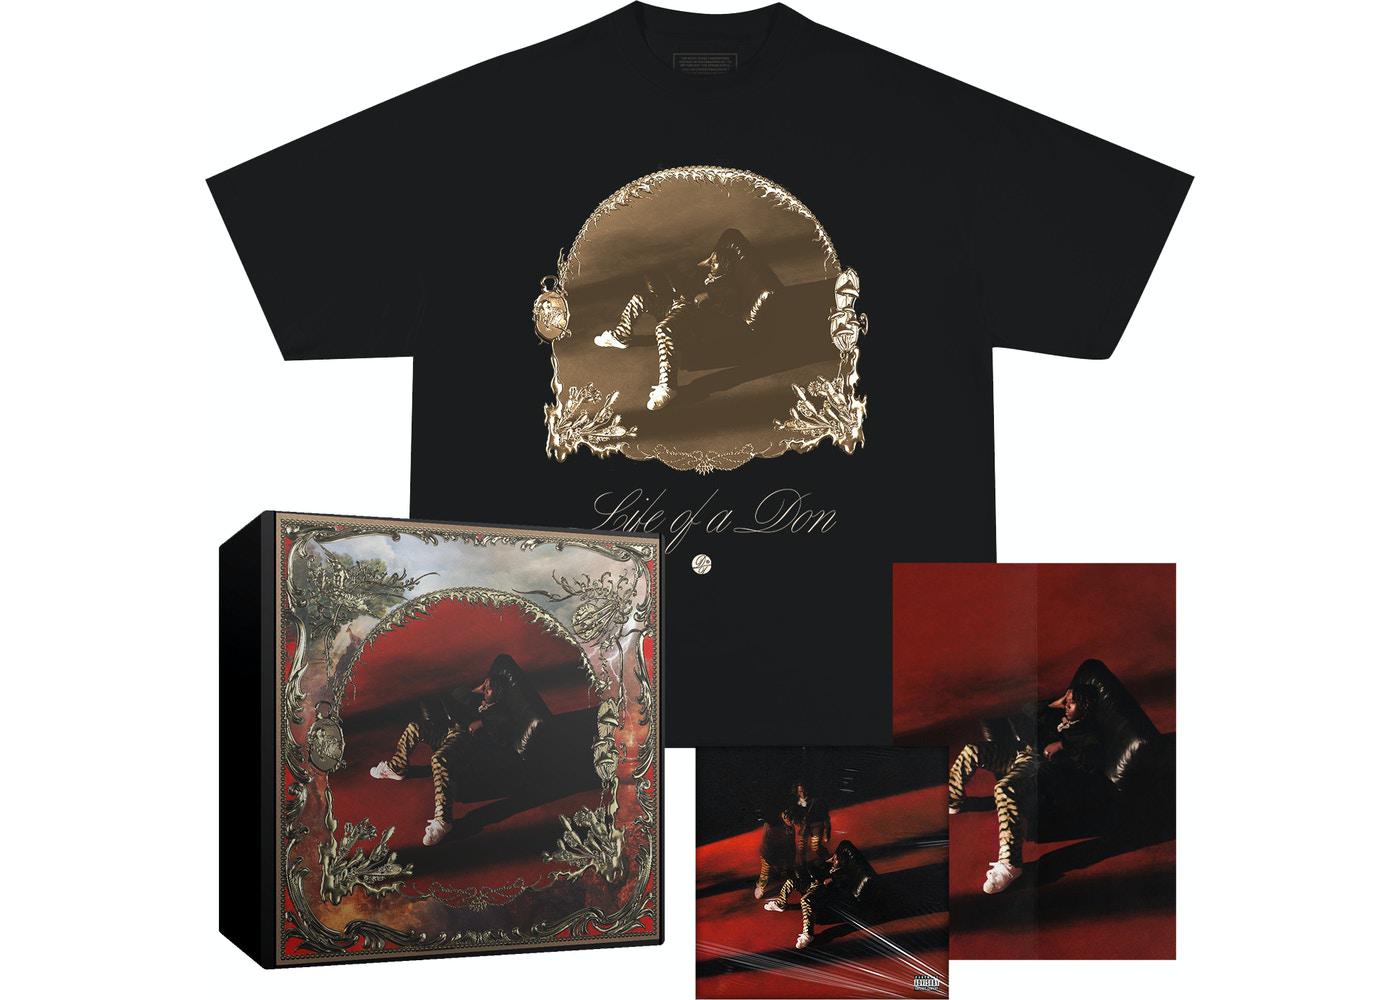 Life of a Don Album Box Set w/ T-Shirt Black by DON TOLIVER